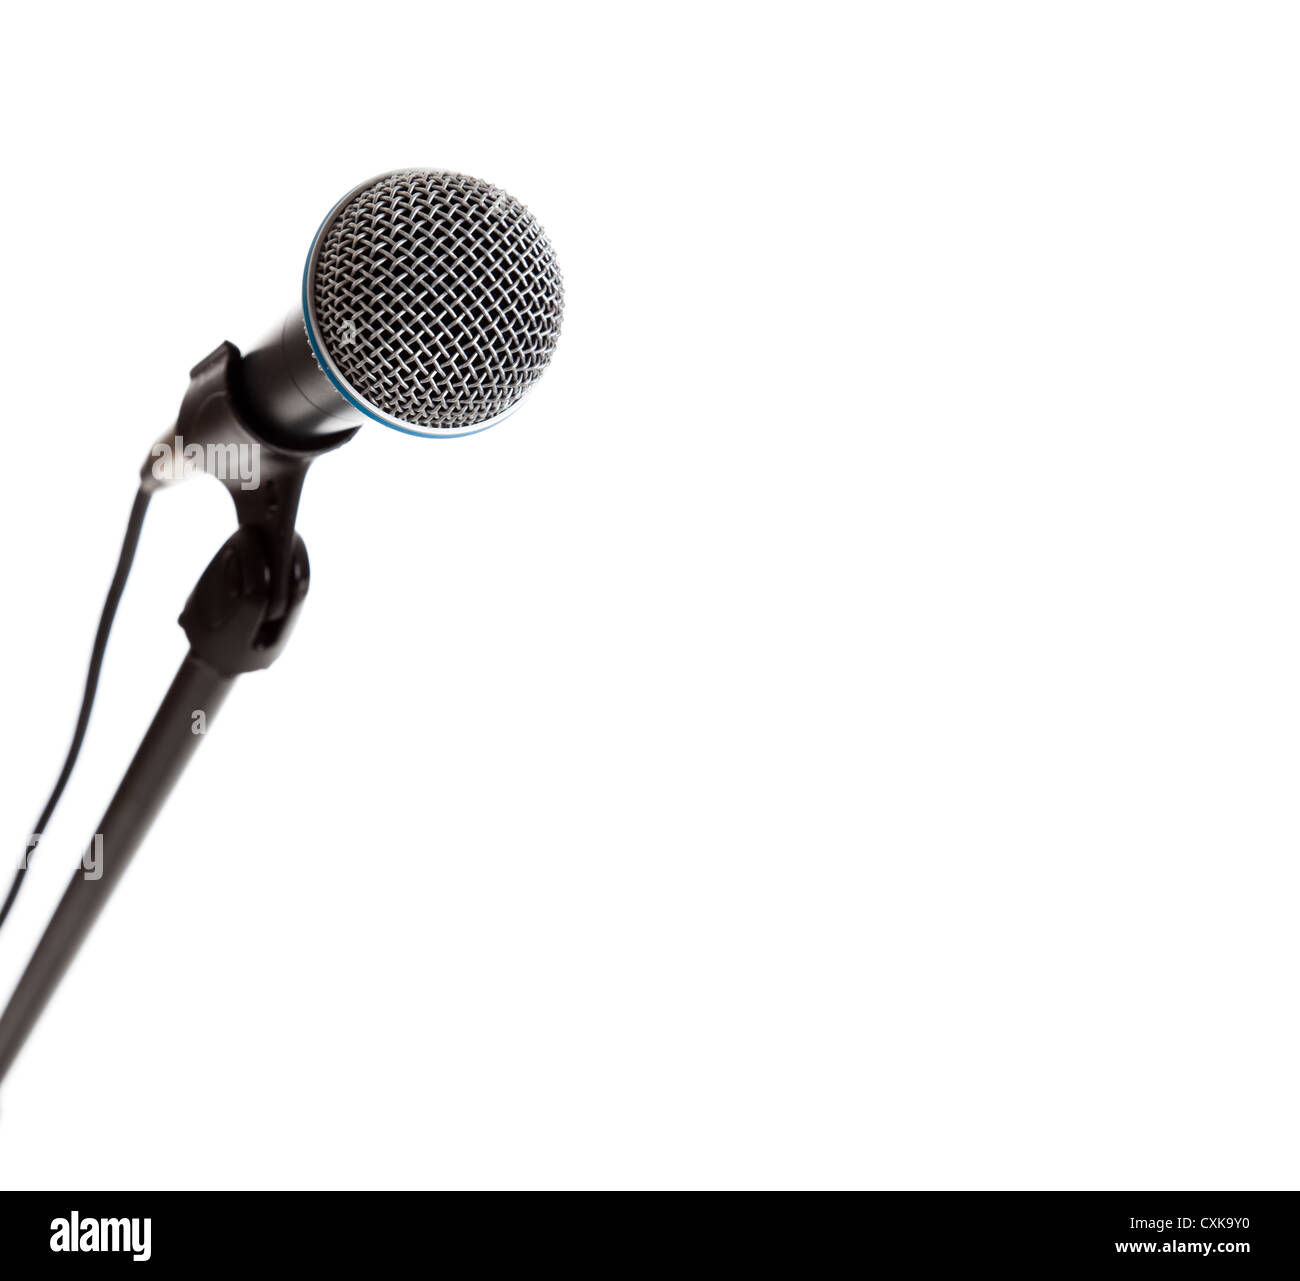 A microphone on the stand on a white background with copy space Stock Photo